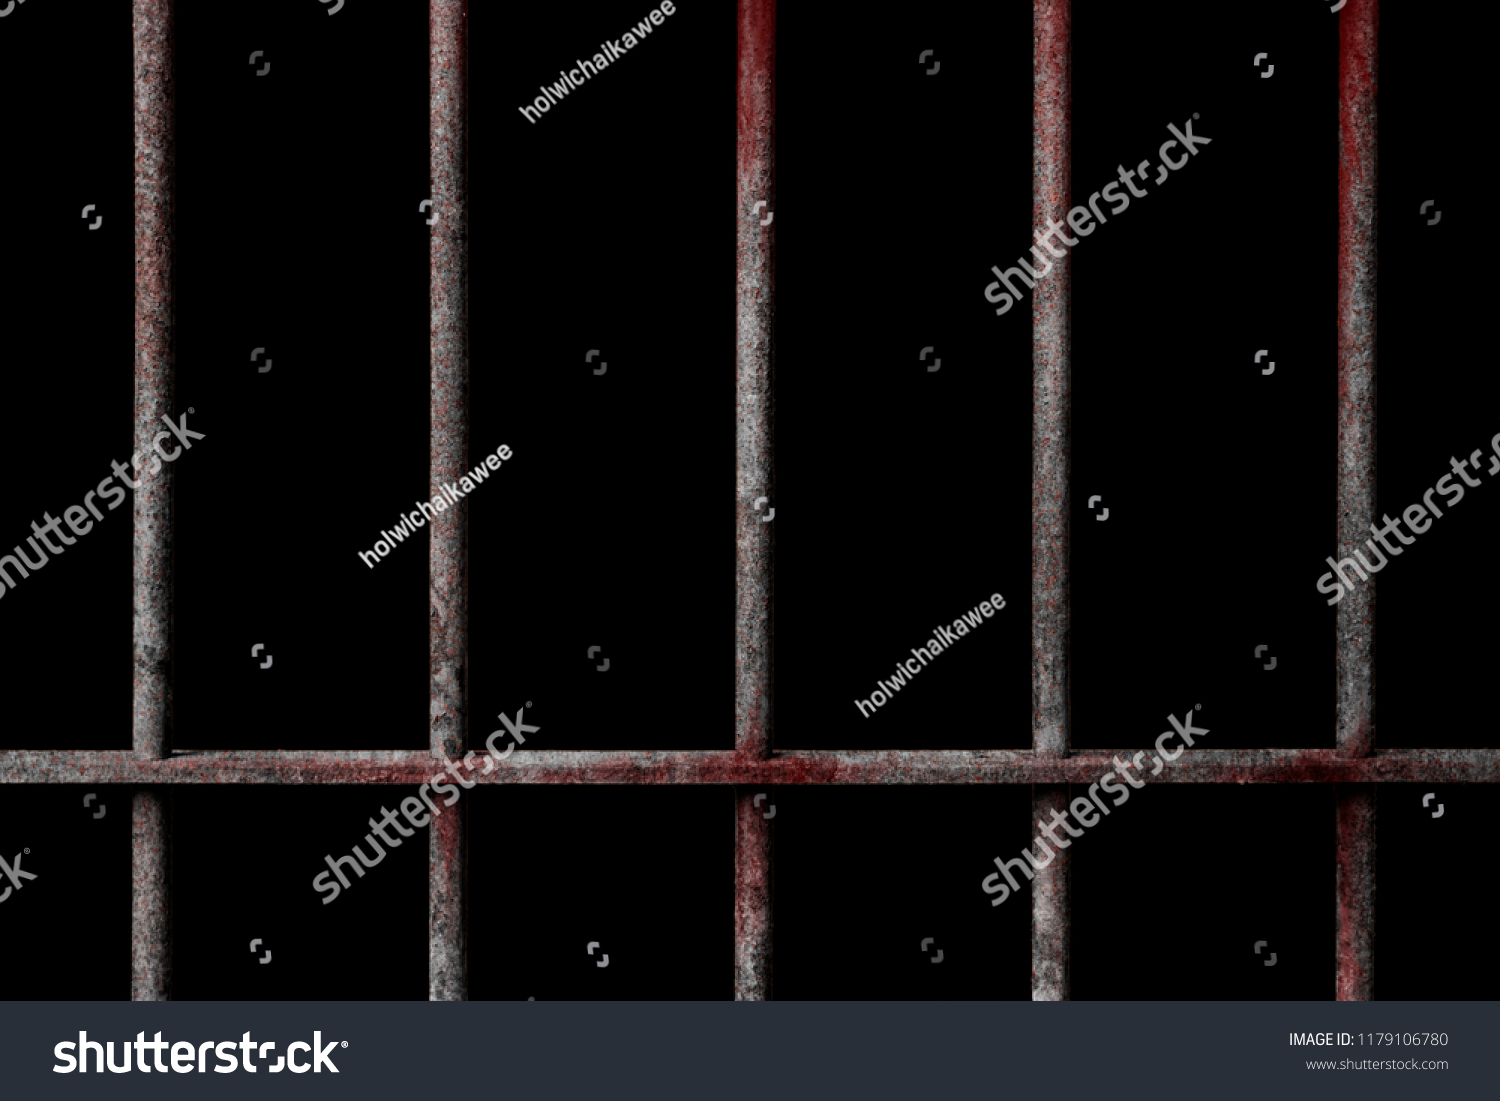 Old Prison Rusted Metal Bars Cell Stock Photo 1179106780 | Shutterstock